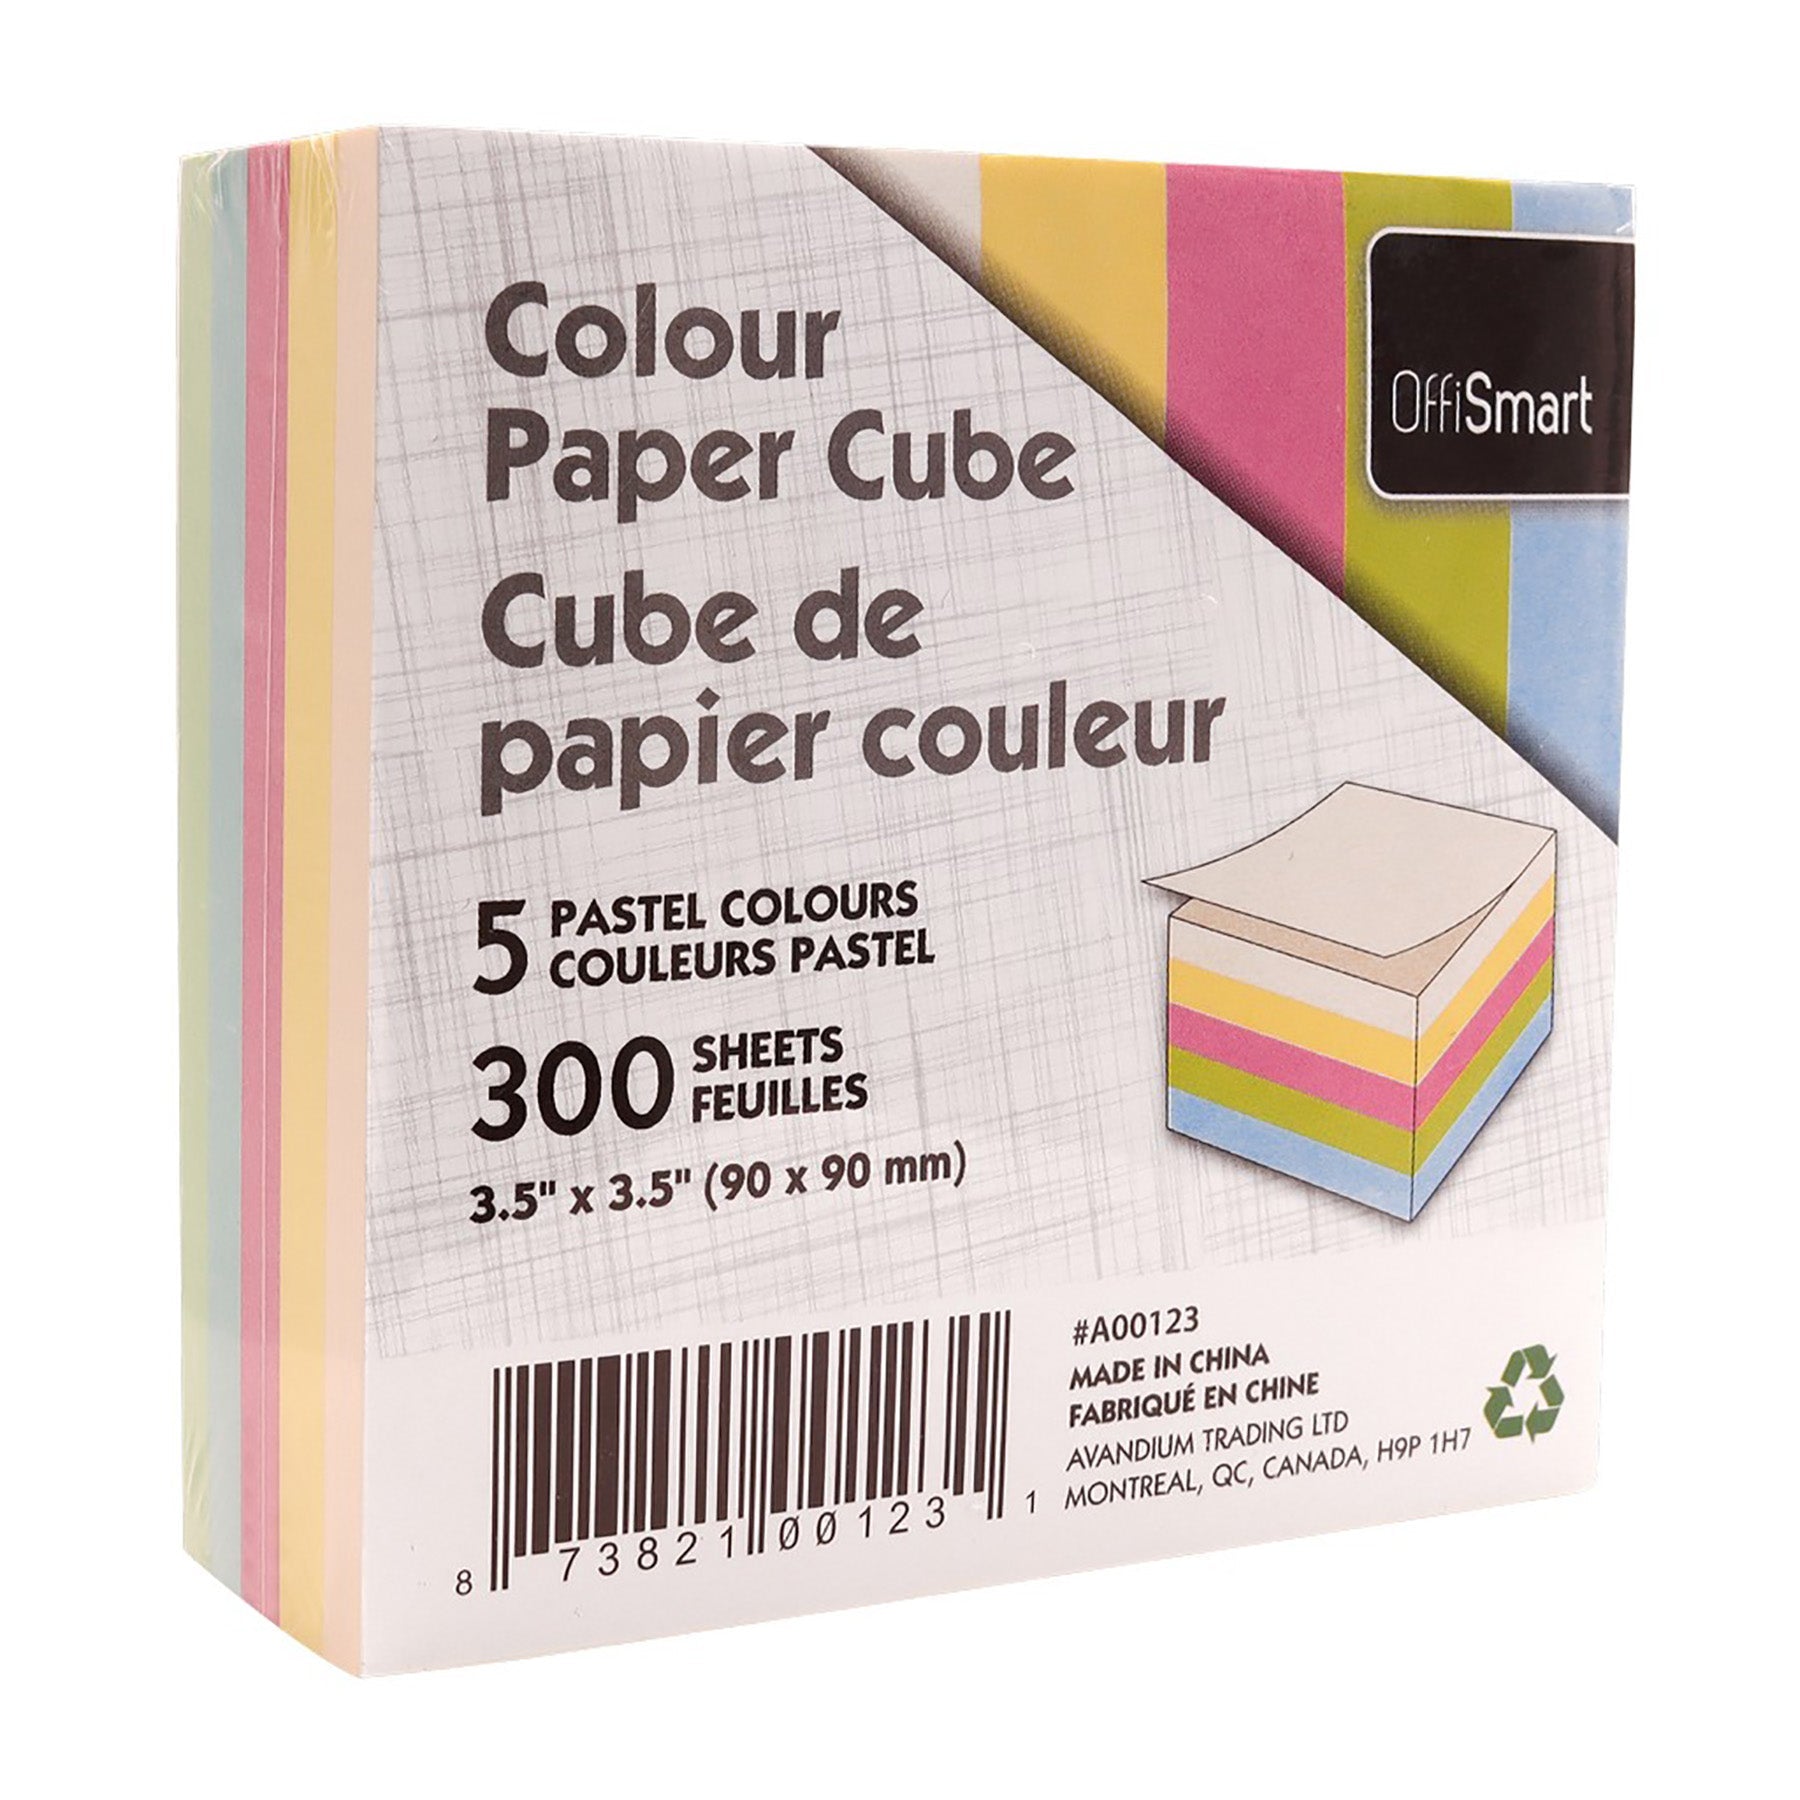 Offismart Paper Cube Pastel 300 Sheets 3.5x3.5in